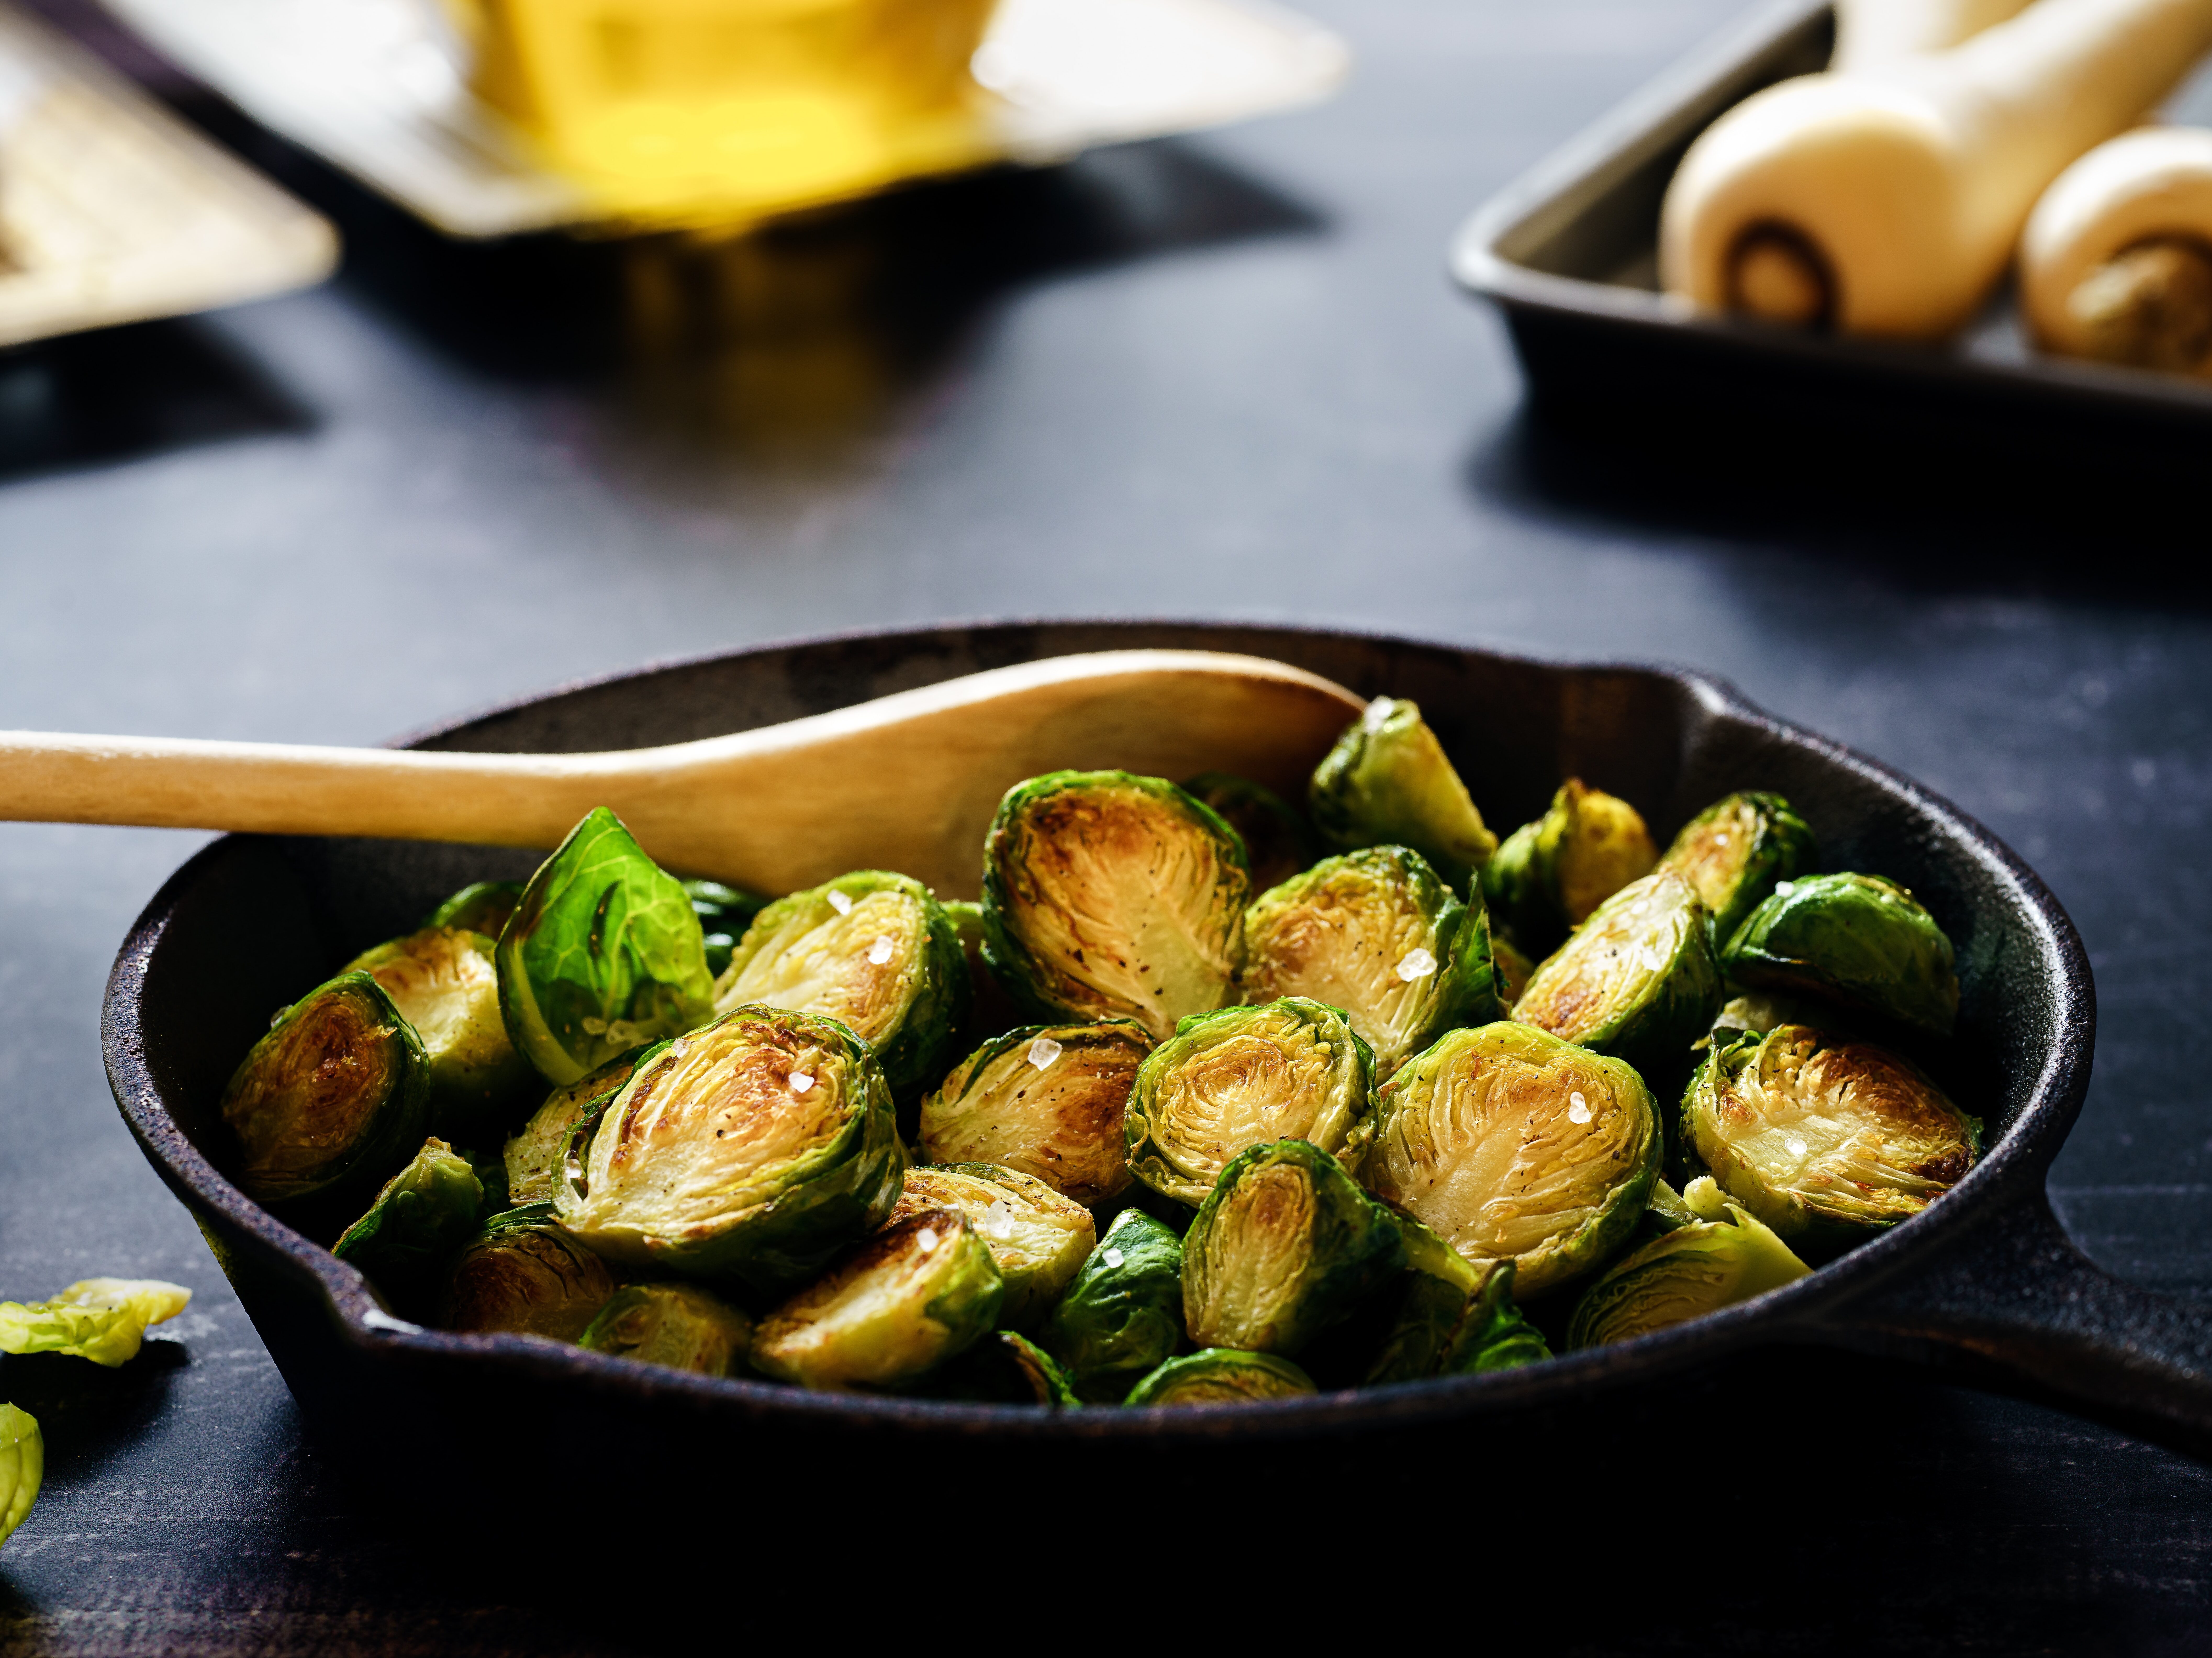 Brussel sprouts roasted